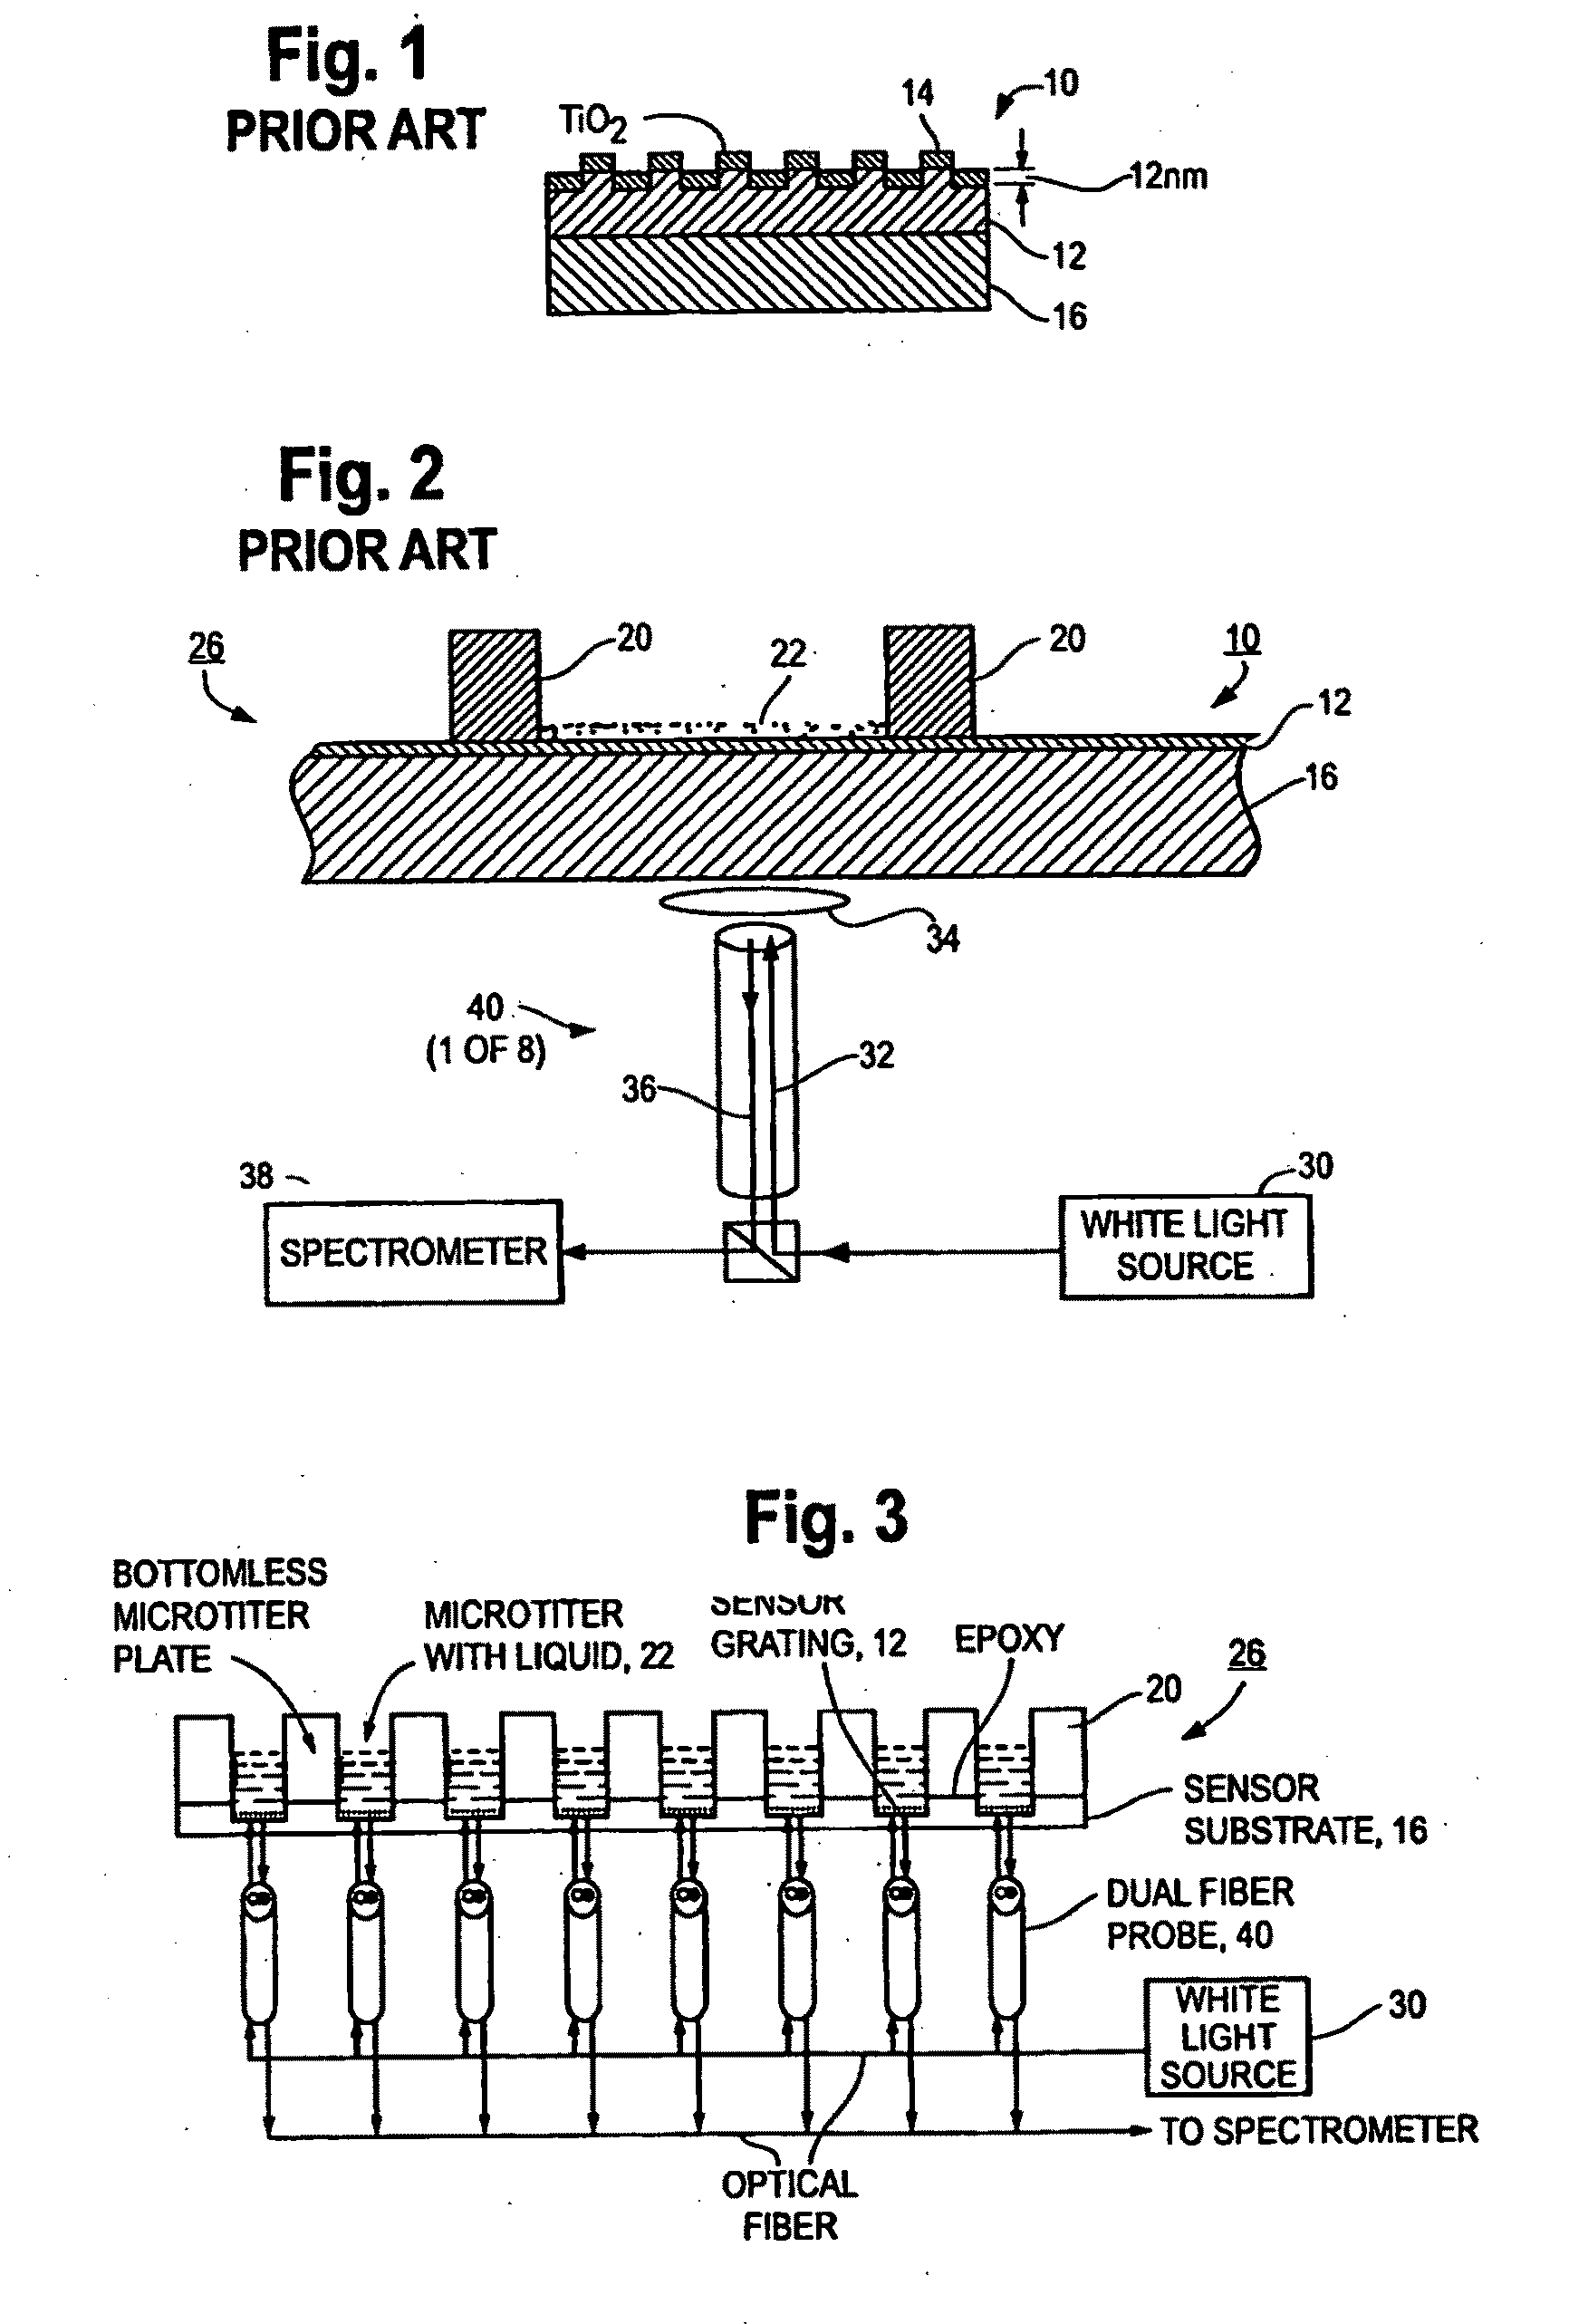 Grating based sensor combining label-free binding detection and fluoresnce amplification and readout system for sensor